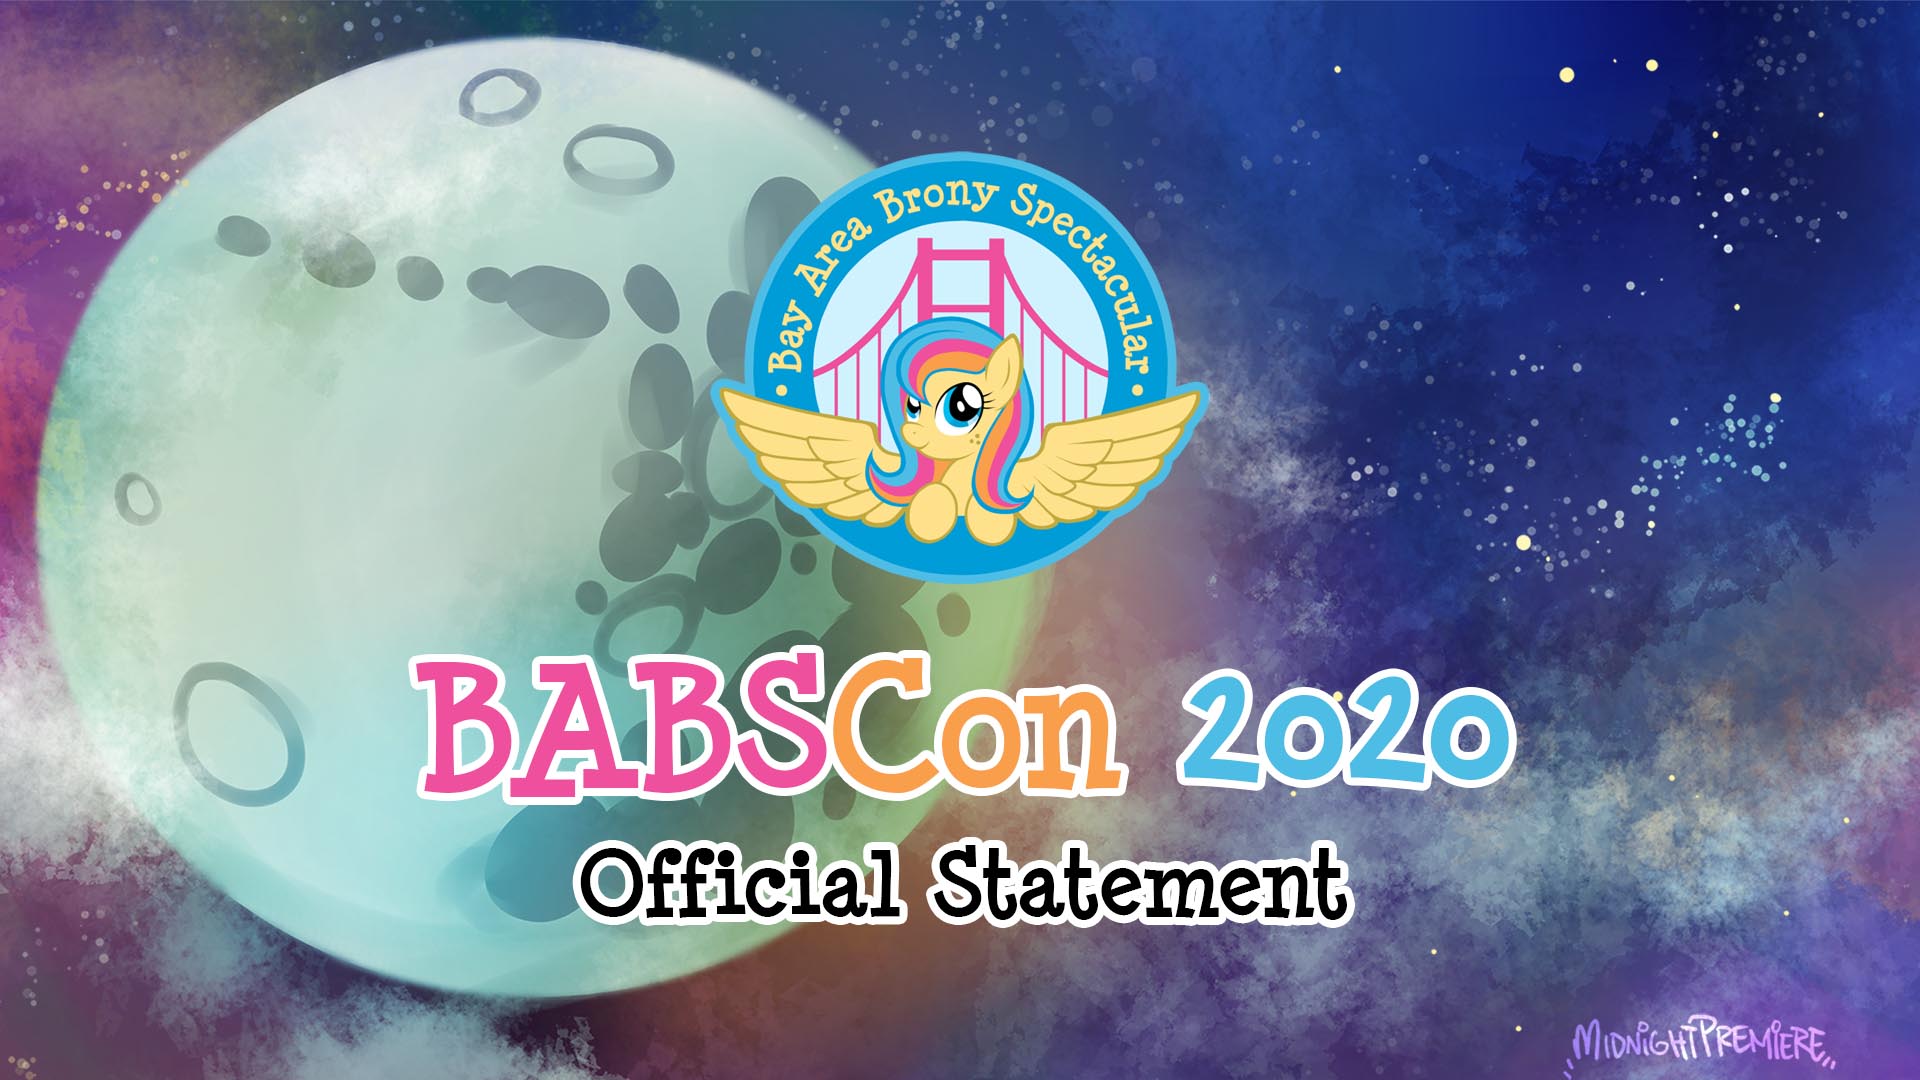 BABSCon 2020 is Canceled Due to COVID-19. Let’s Get Started on BABSCon 2021!